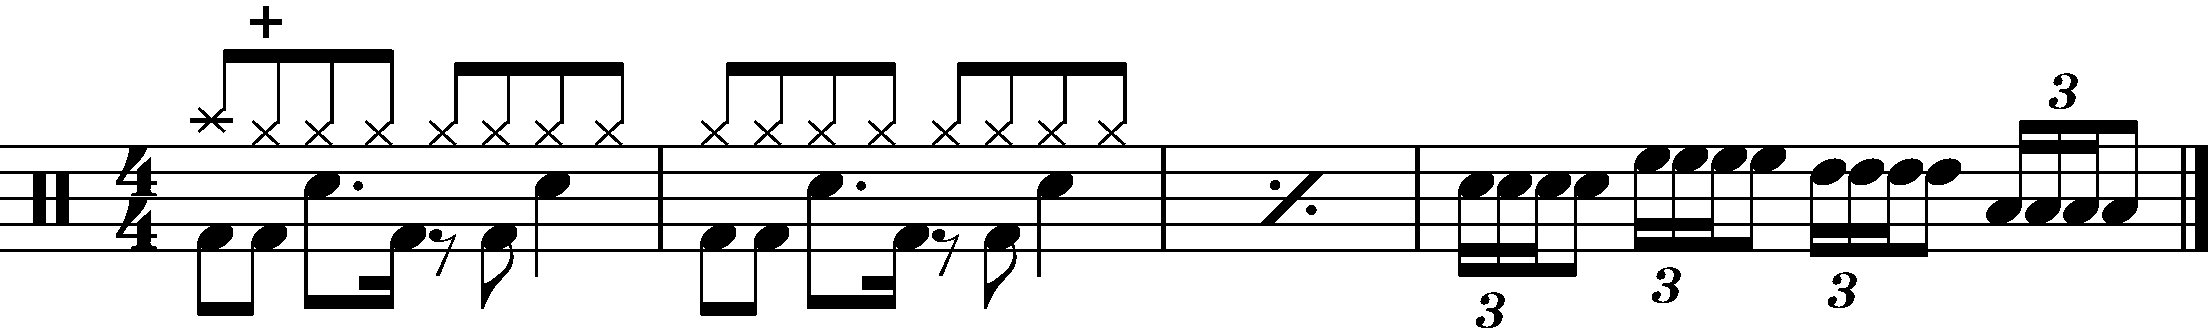 A four bar phrased using a four stroke roll fill